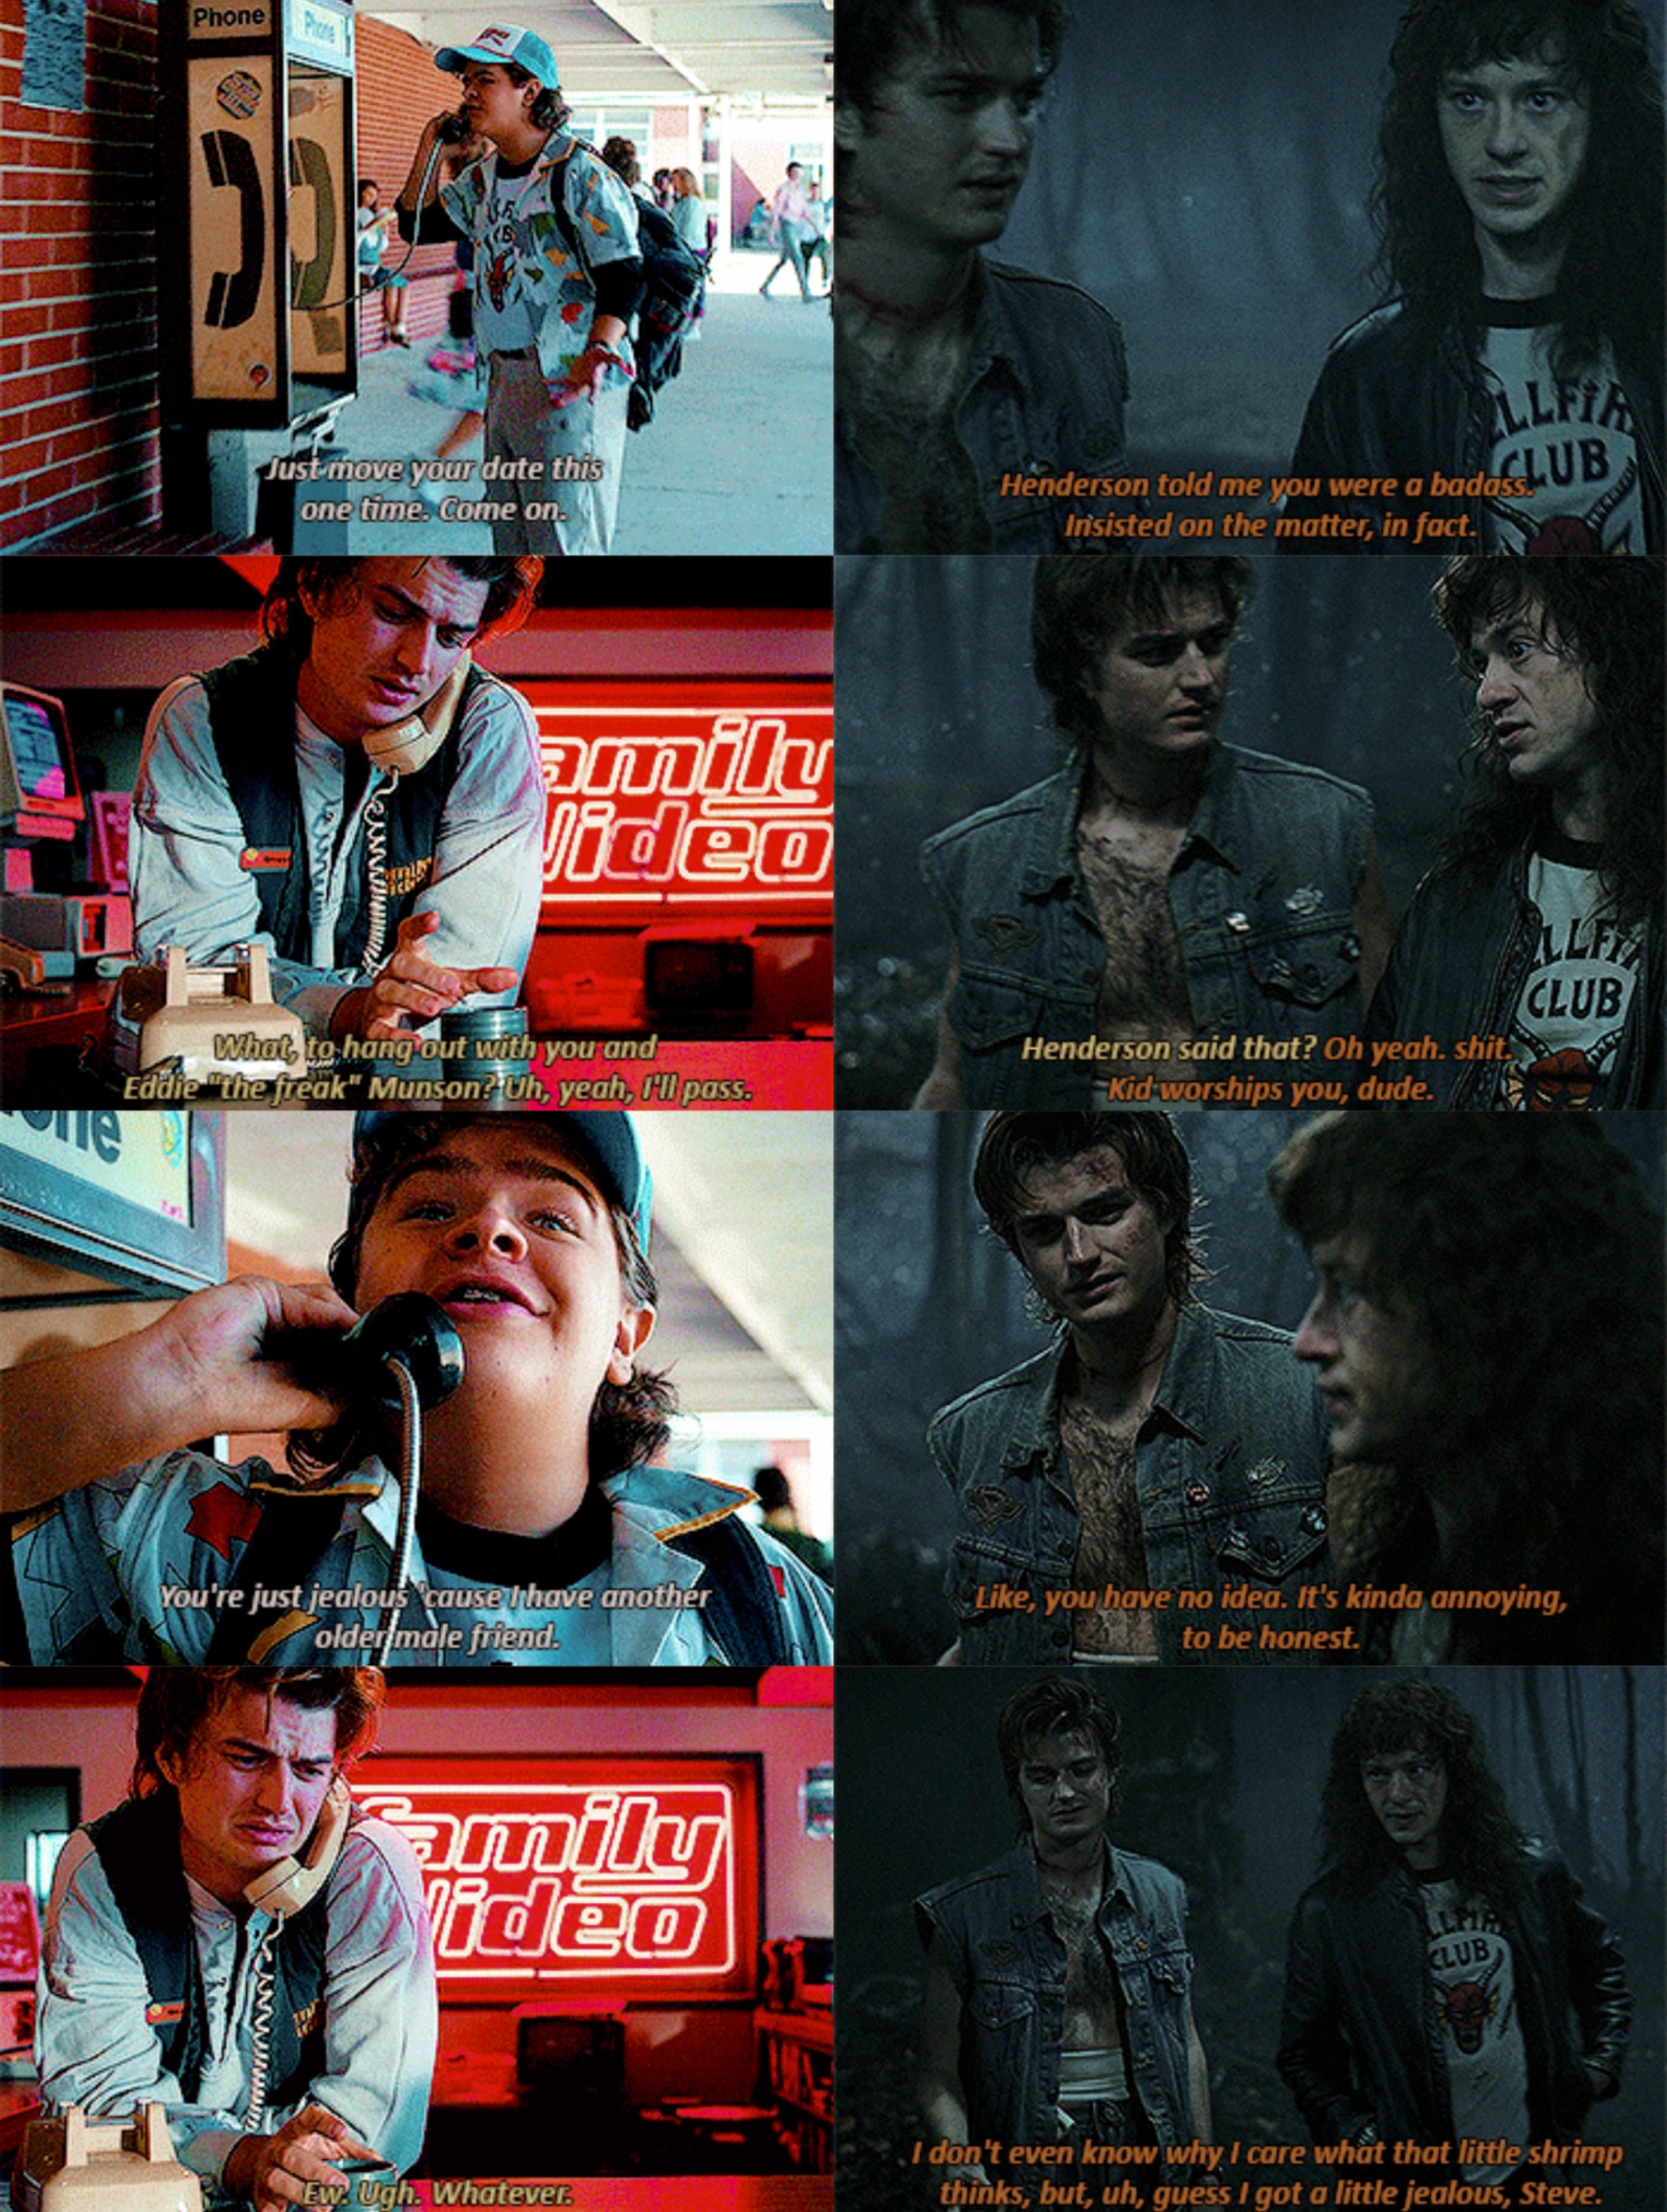 ᴴ*ck the f*cking nancy, jonathan, and steve love triangle. I keep the most beautiful and epic triangle of this season steve, dustin and eddie #StrangerThings